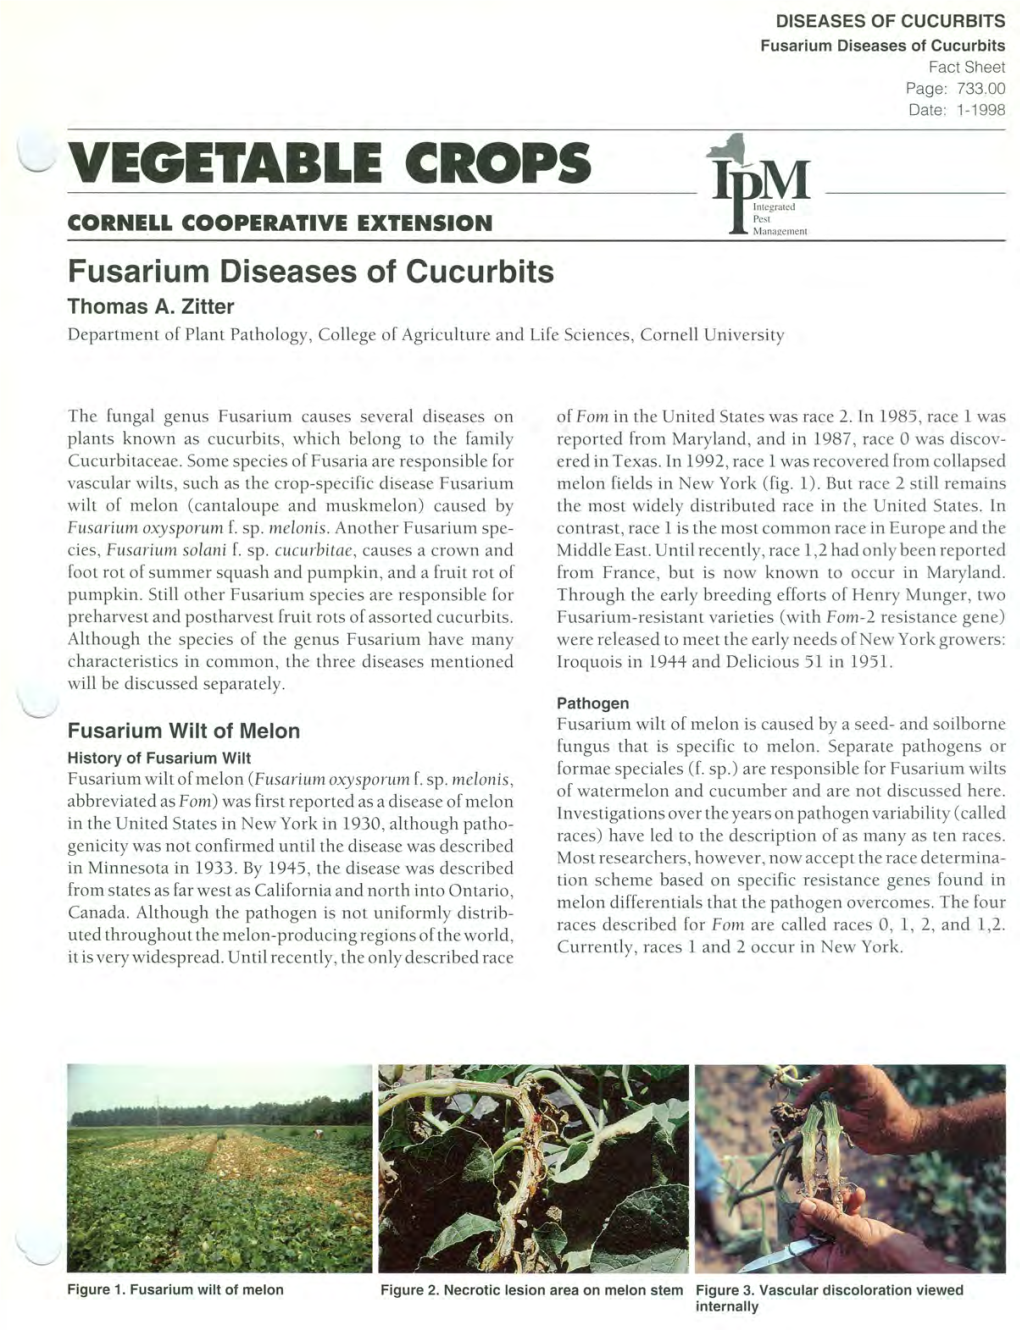 Fusarium Diseases of Cucurbits Fact Sheet Page: 733.00 Date 1-1998 VEGETABLE CROPS ~~ CORNELL COOPERATIVE EXTENSION Fusarium Diseases of Cucurbits Thomas A